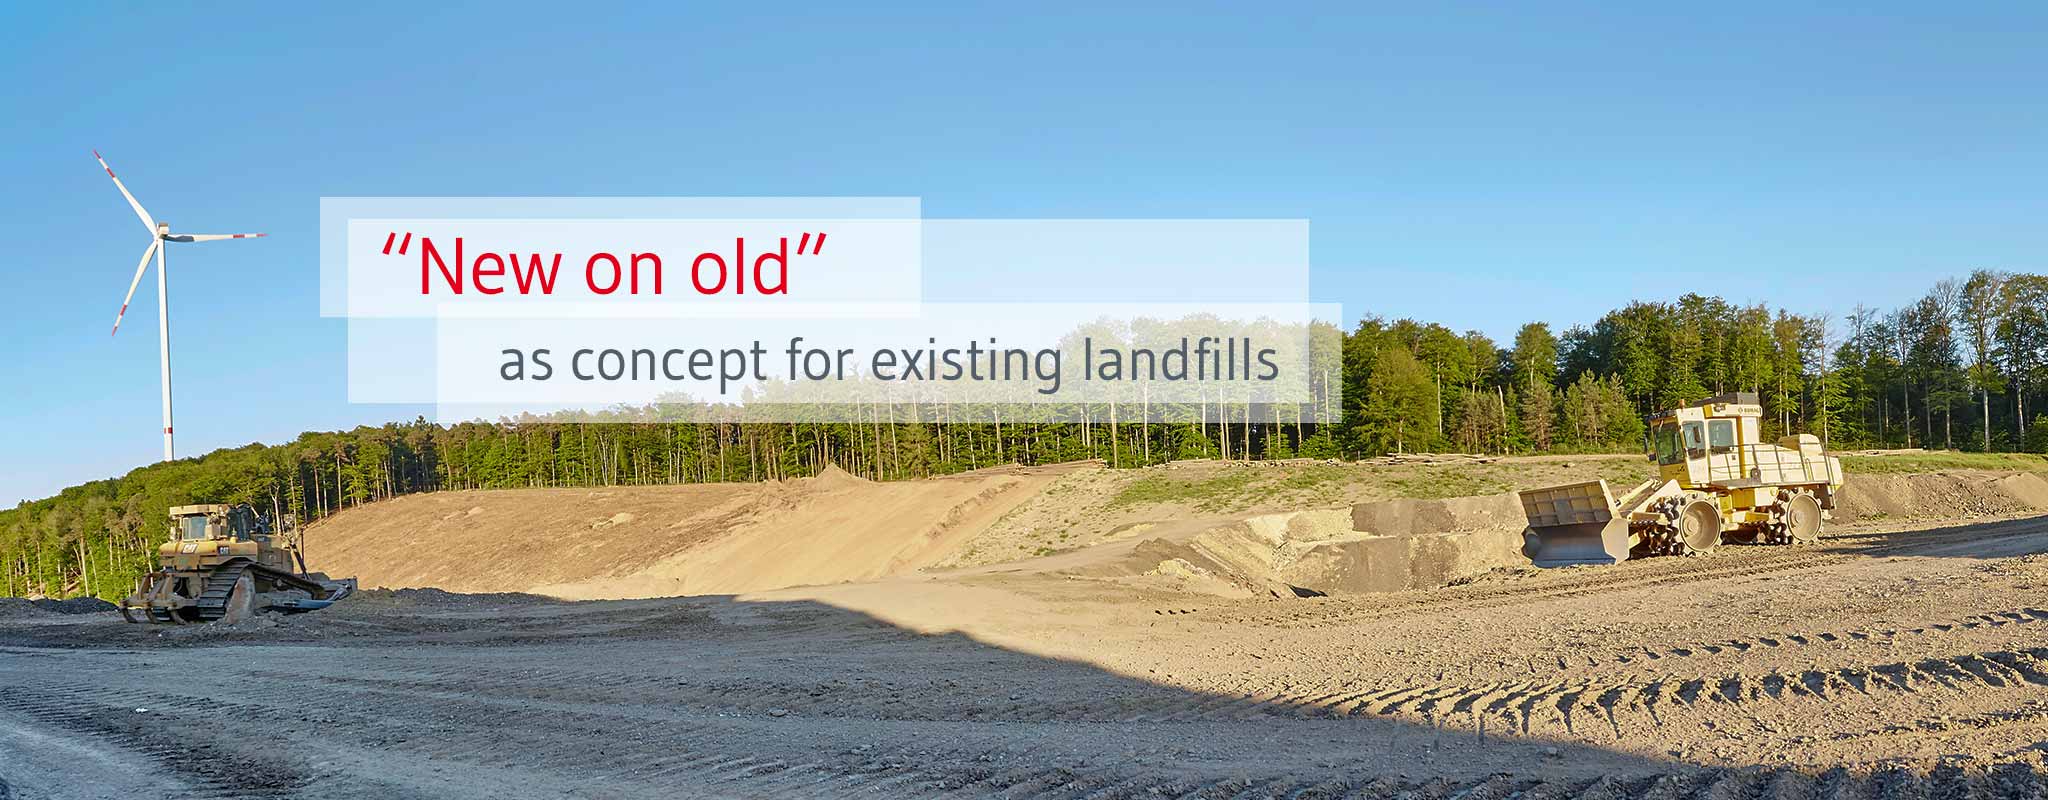 Landfill construction: New on existing